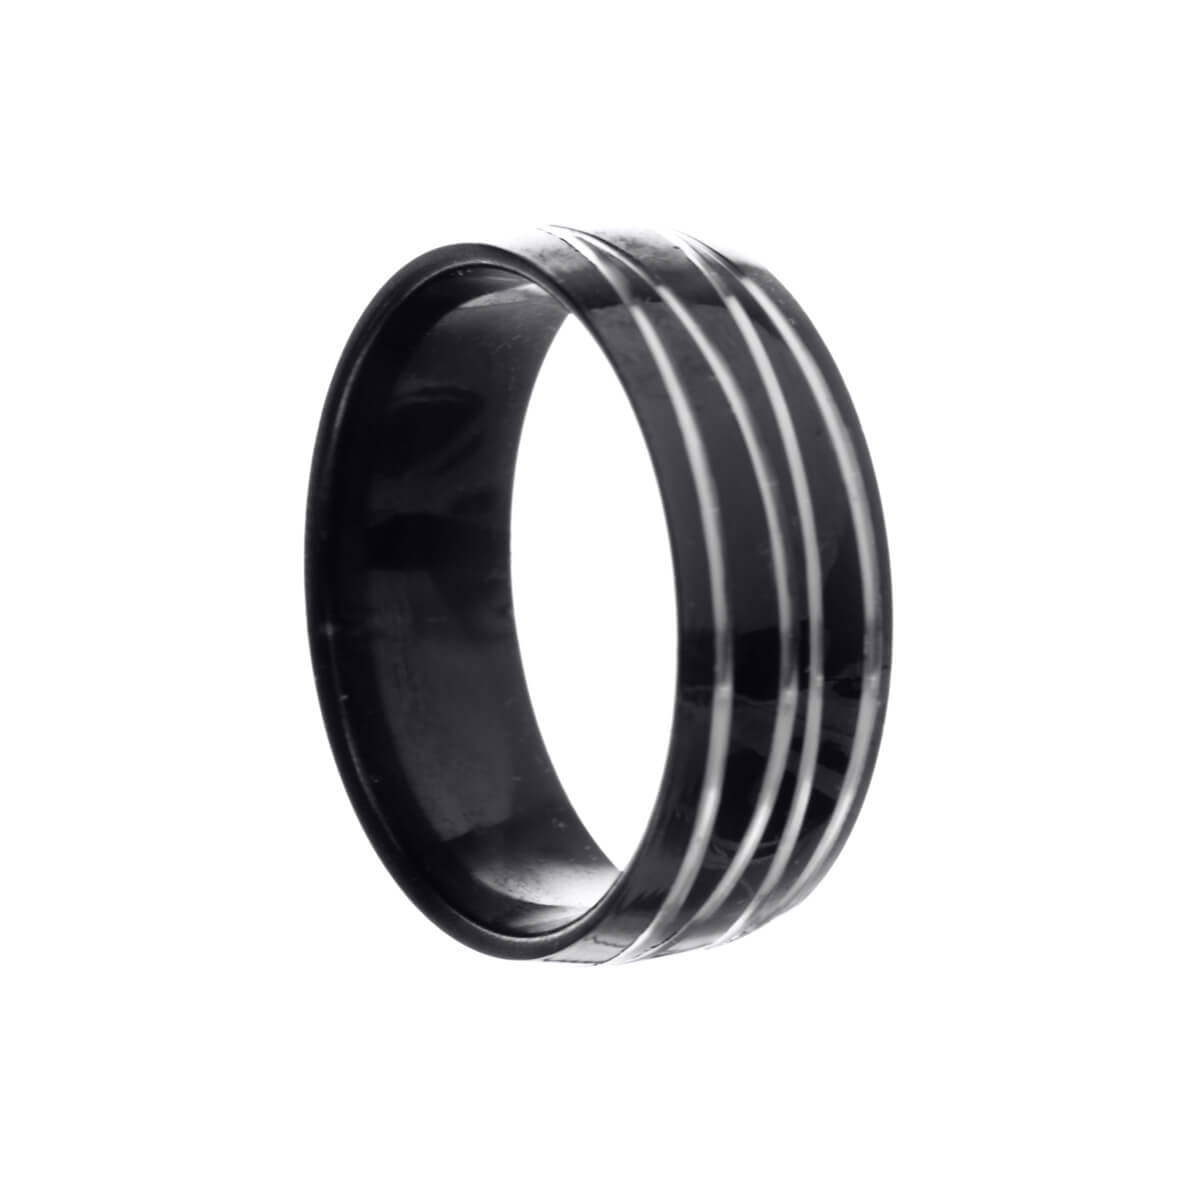 Black steel ring with silver stripes 8mm